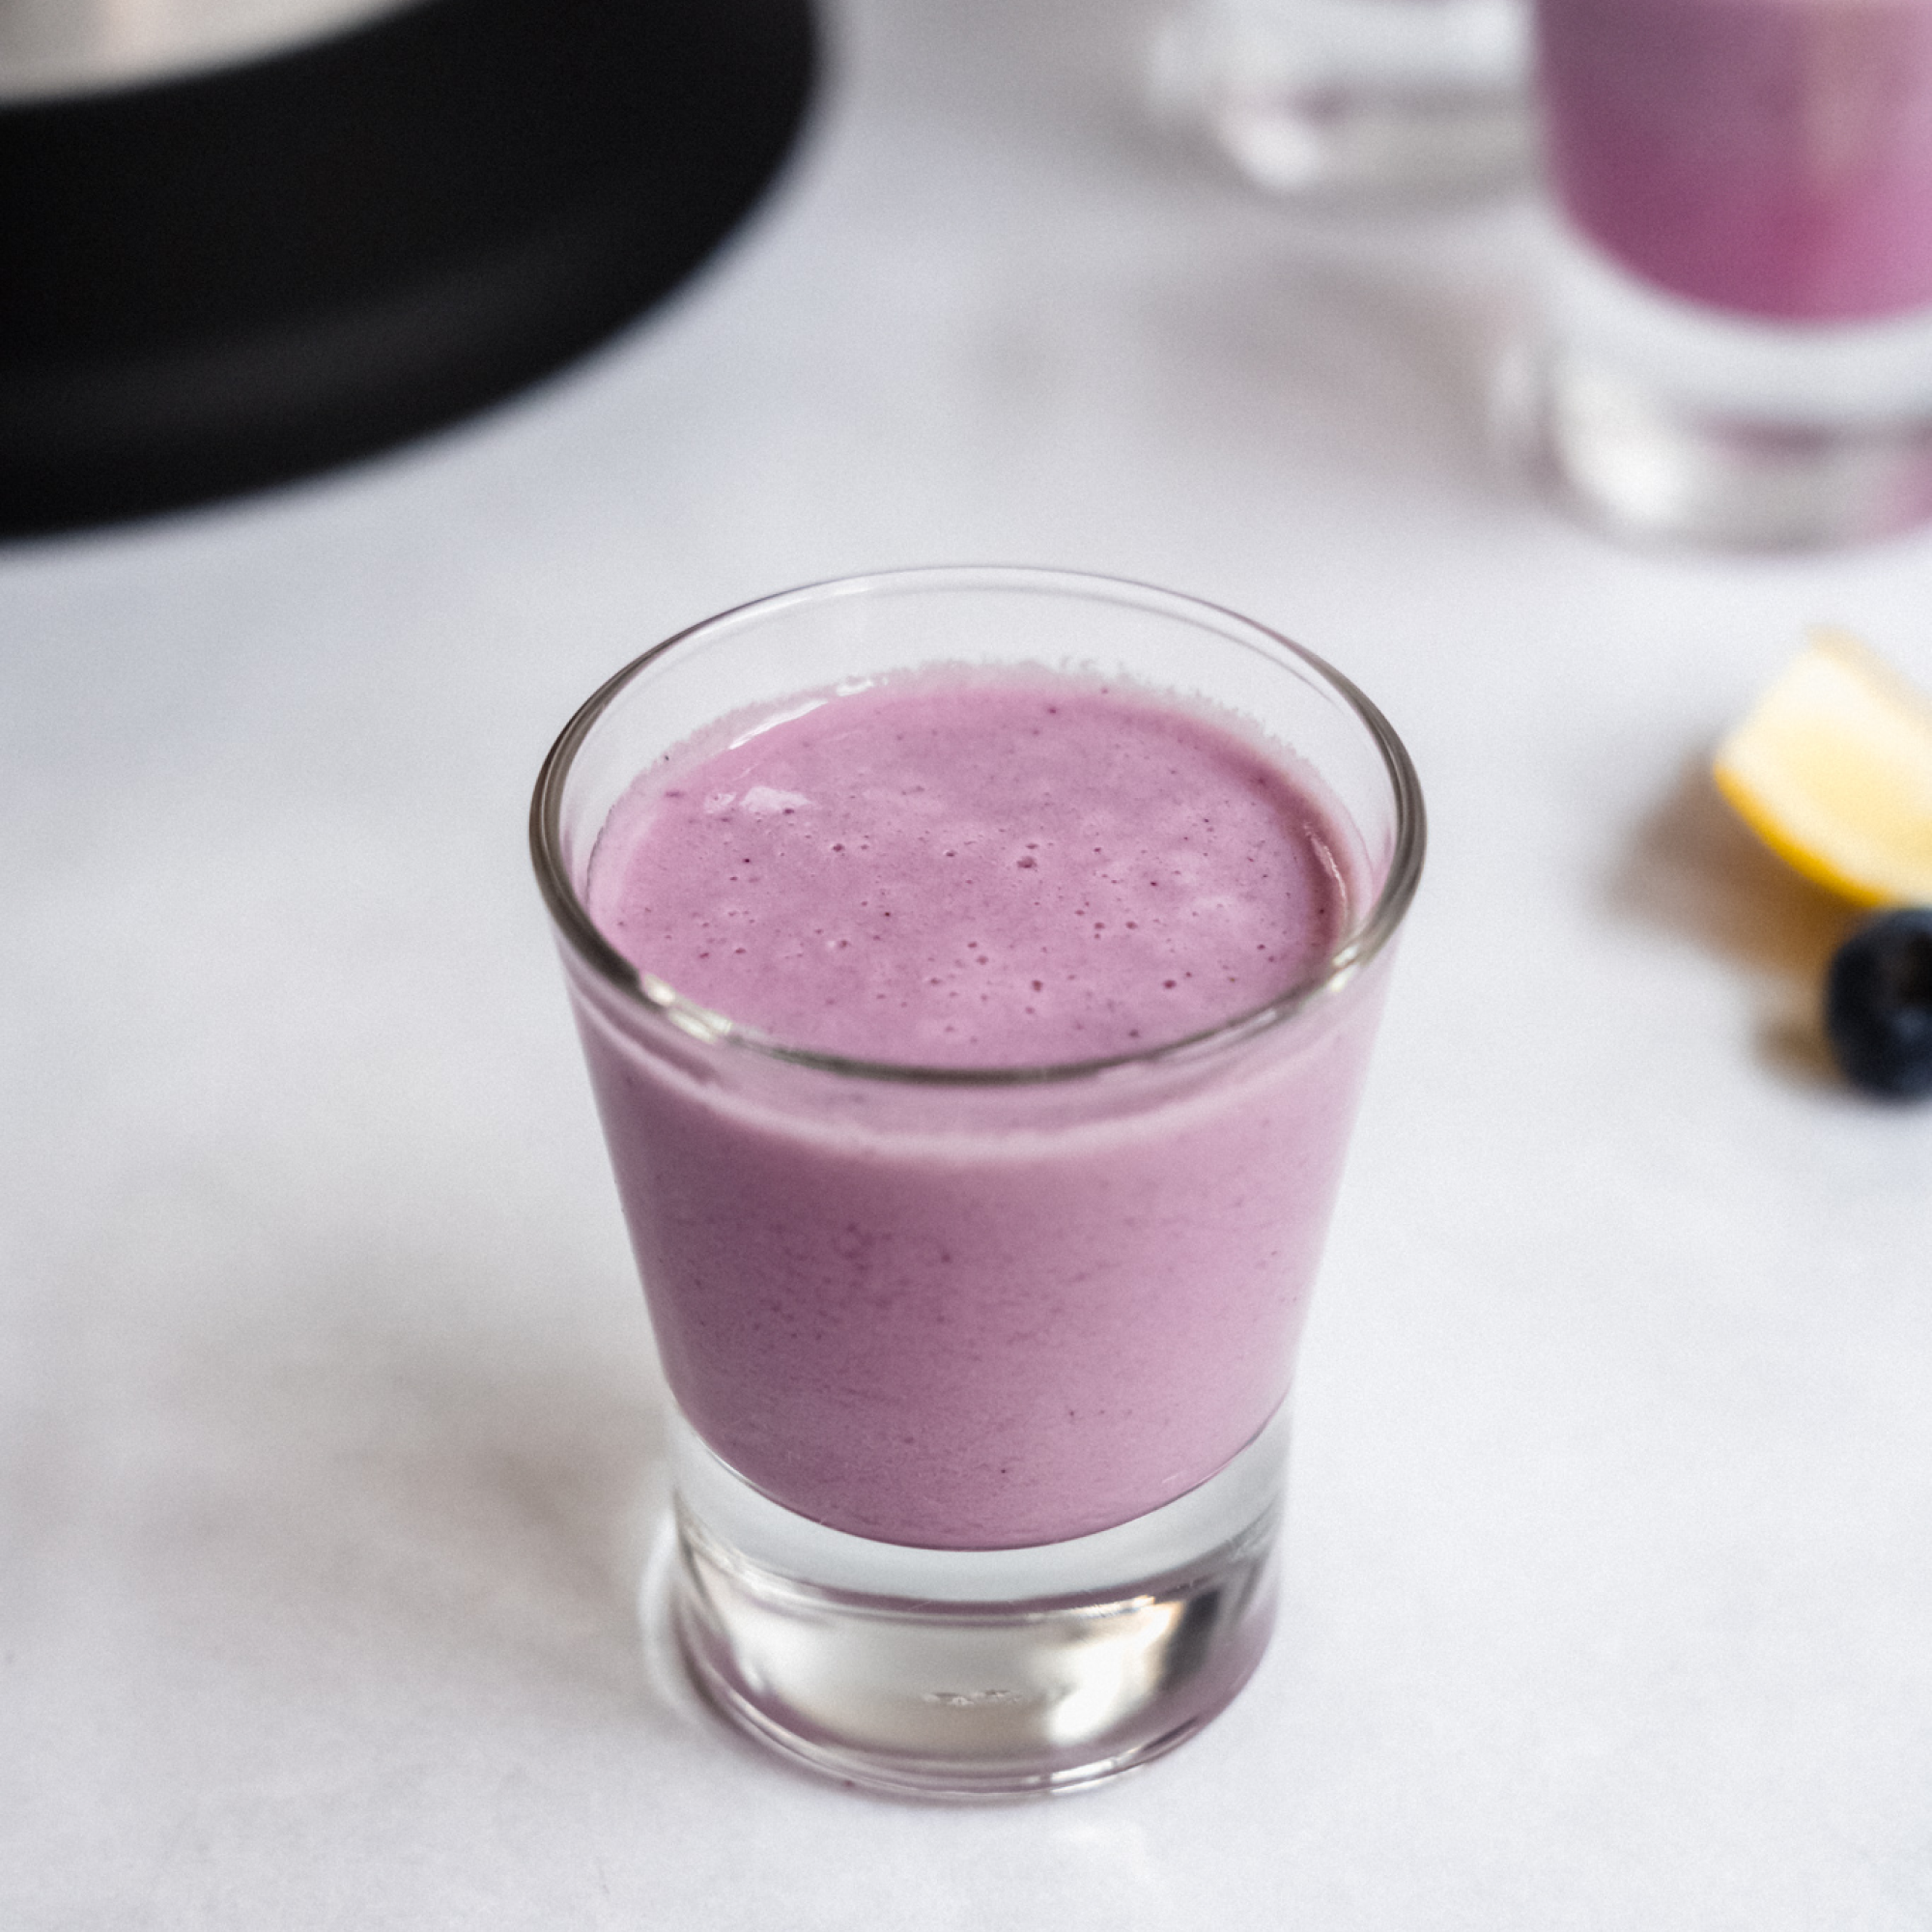 Health-boosting Blueberry Lemon Probiotic Shot from Almond Cow